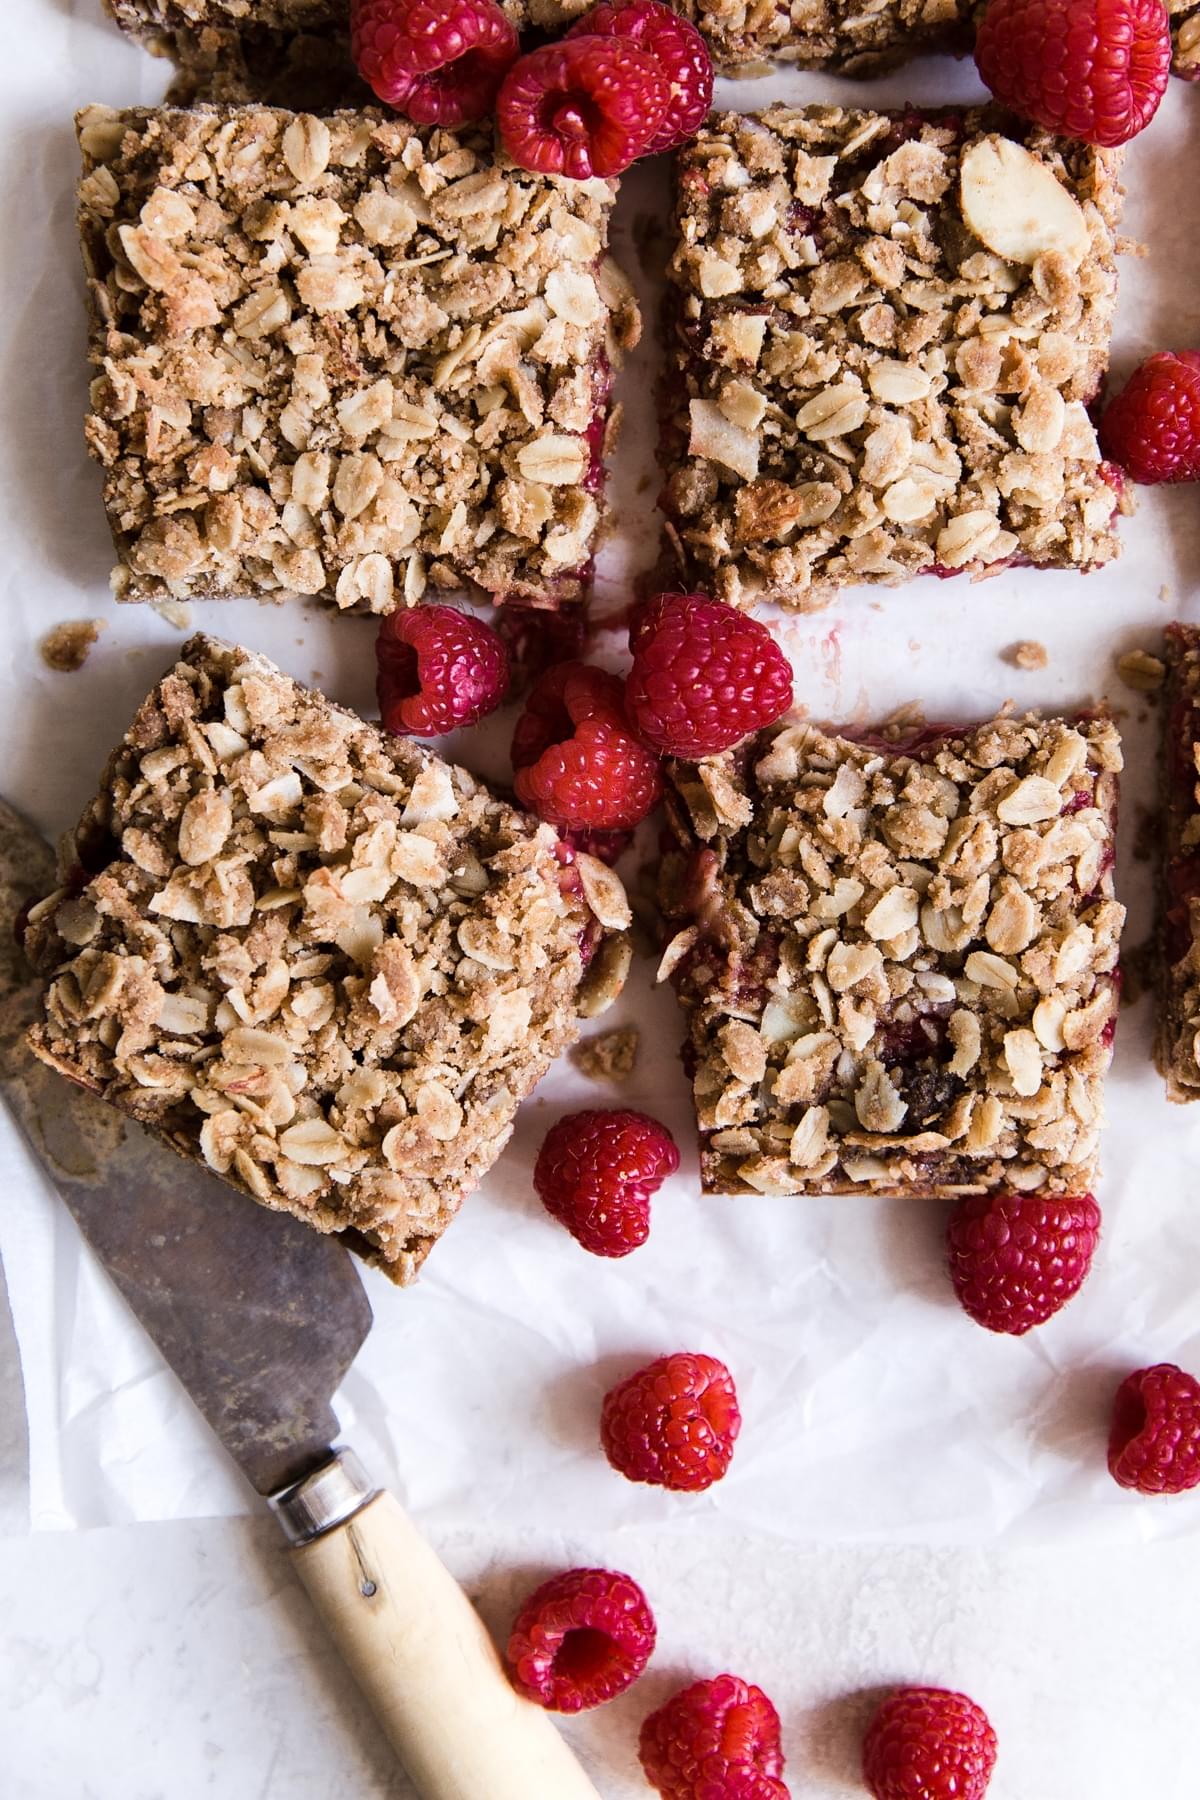 4 slices Raspberry Oatmeal Breakfast Bars with almonds and coconut with a knife